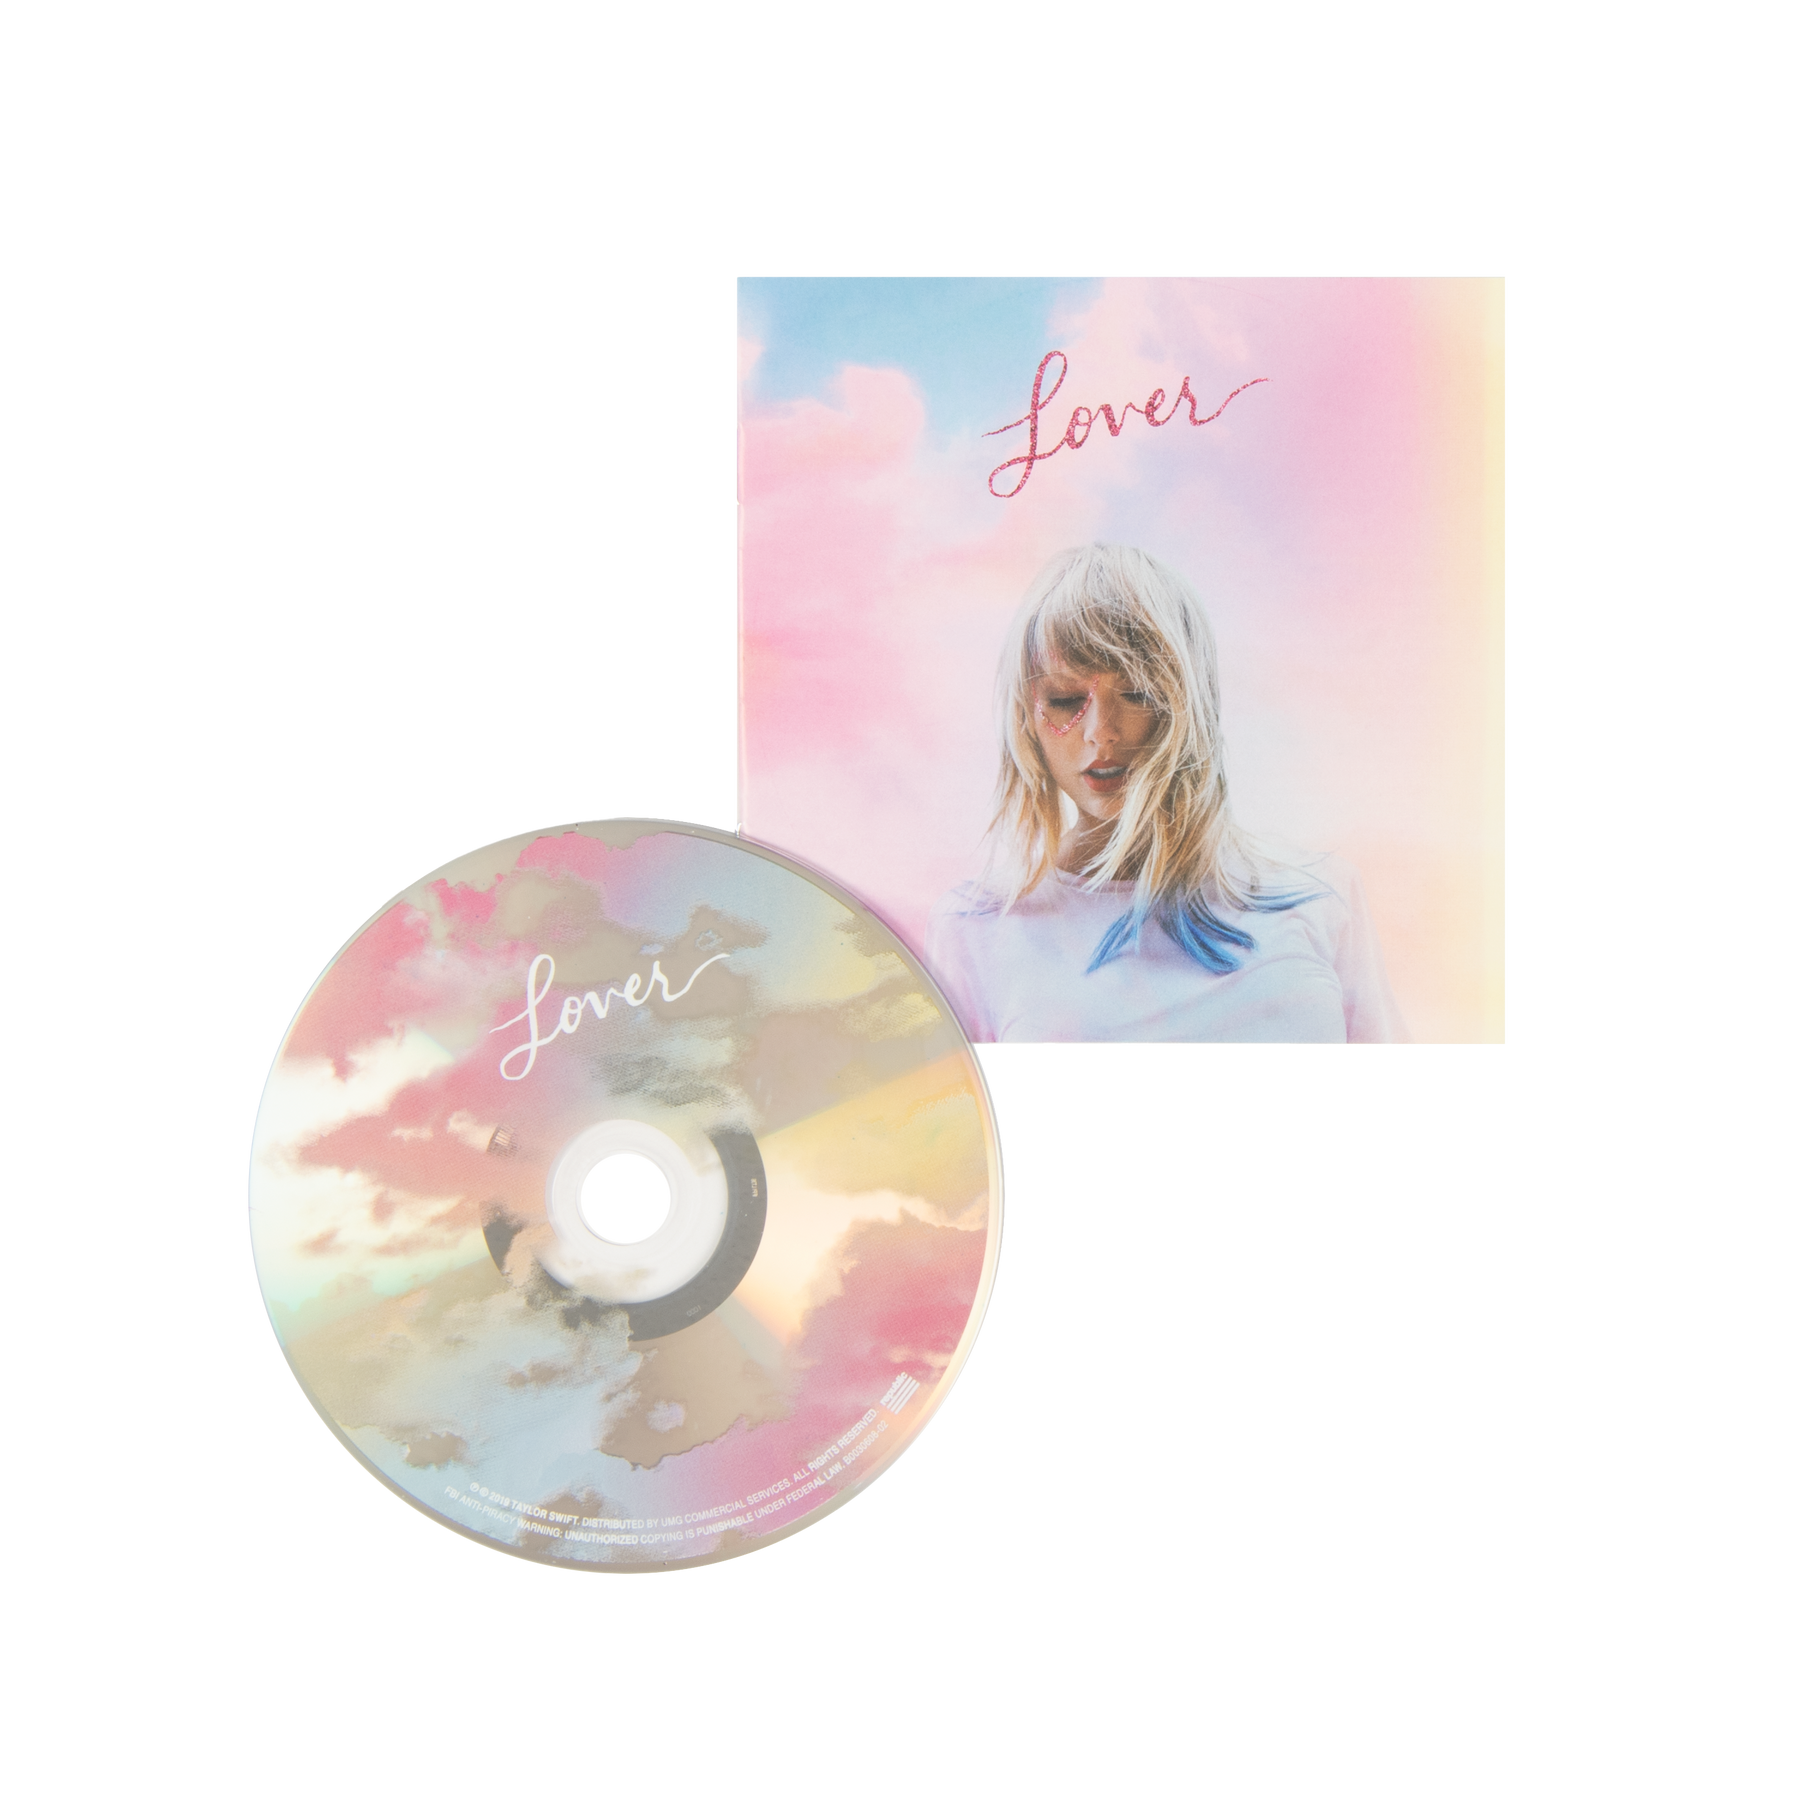 Taylor Swift - Lover CD Deluxe Version 4